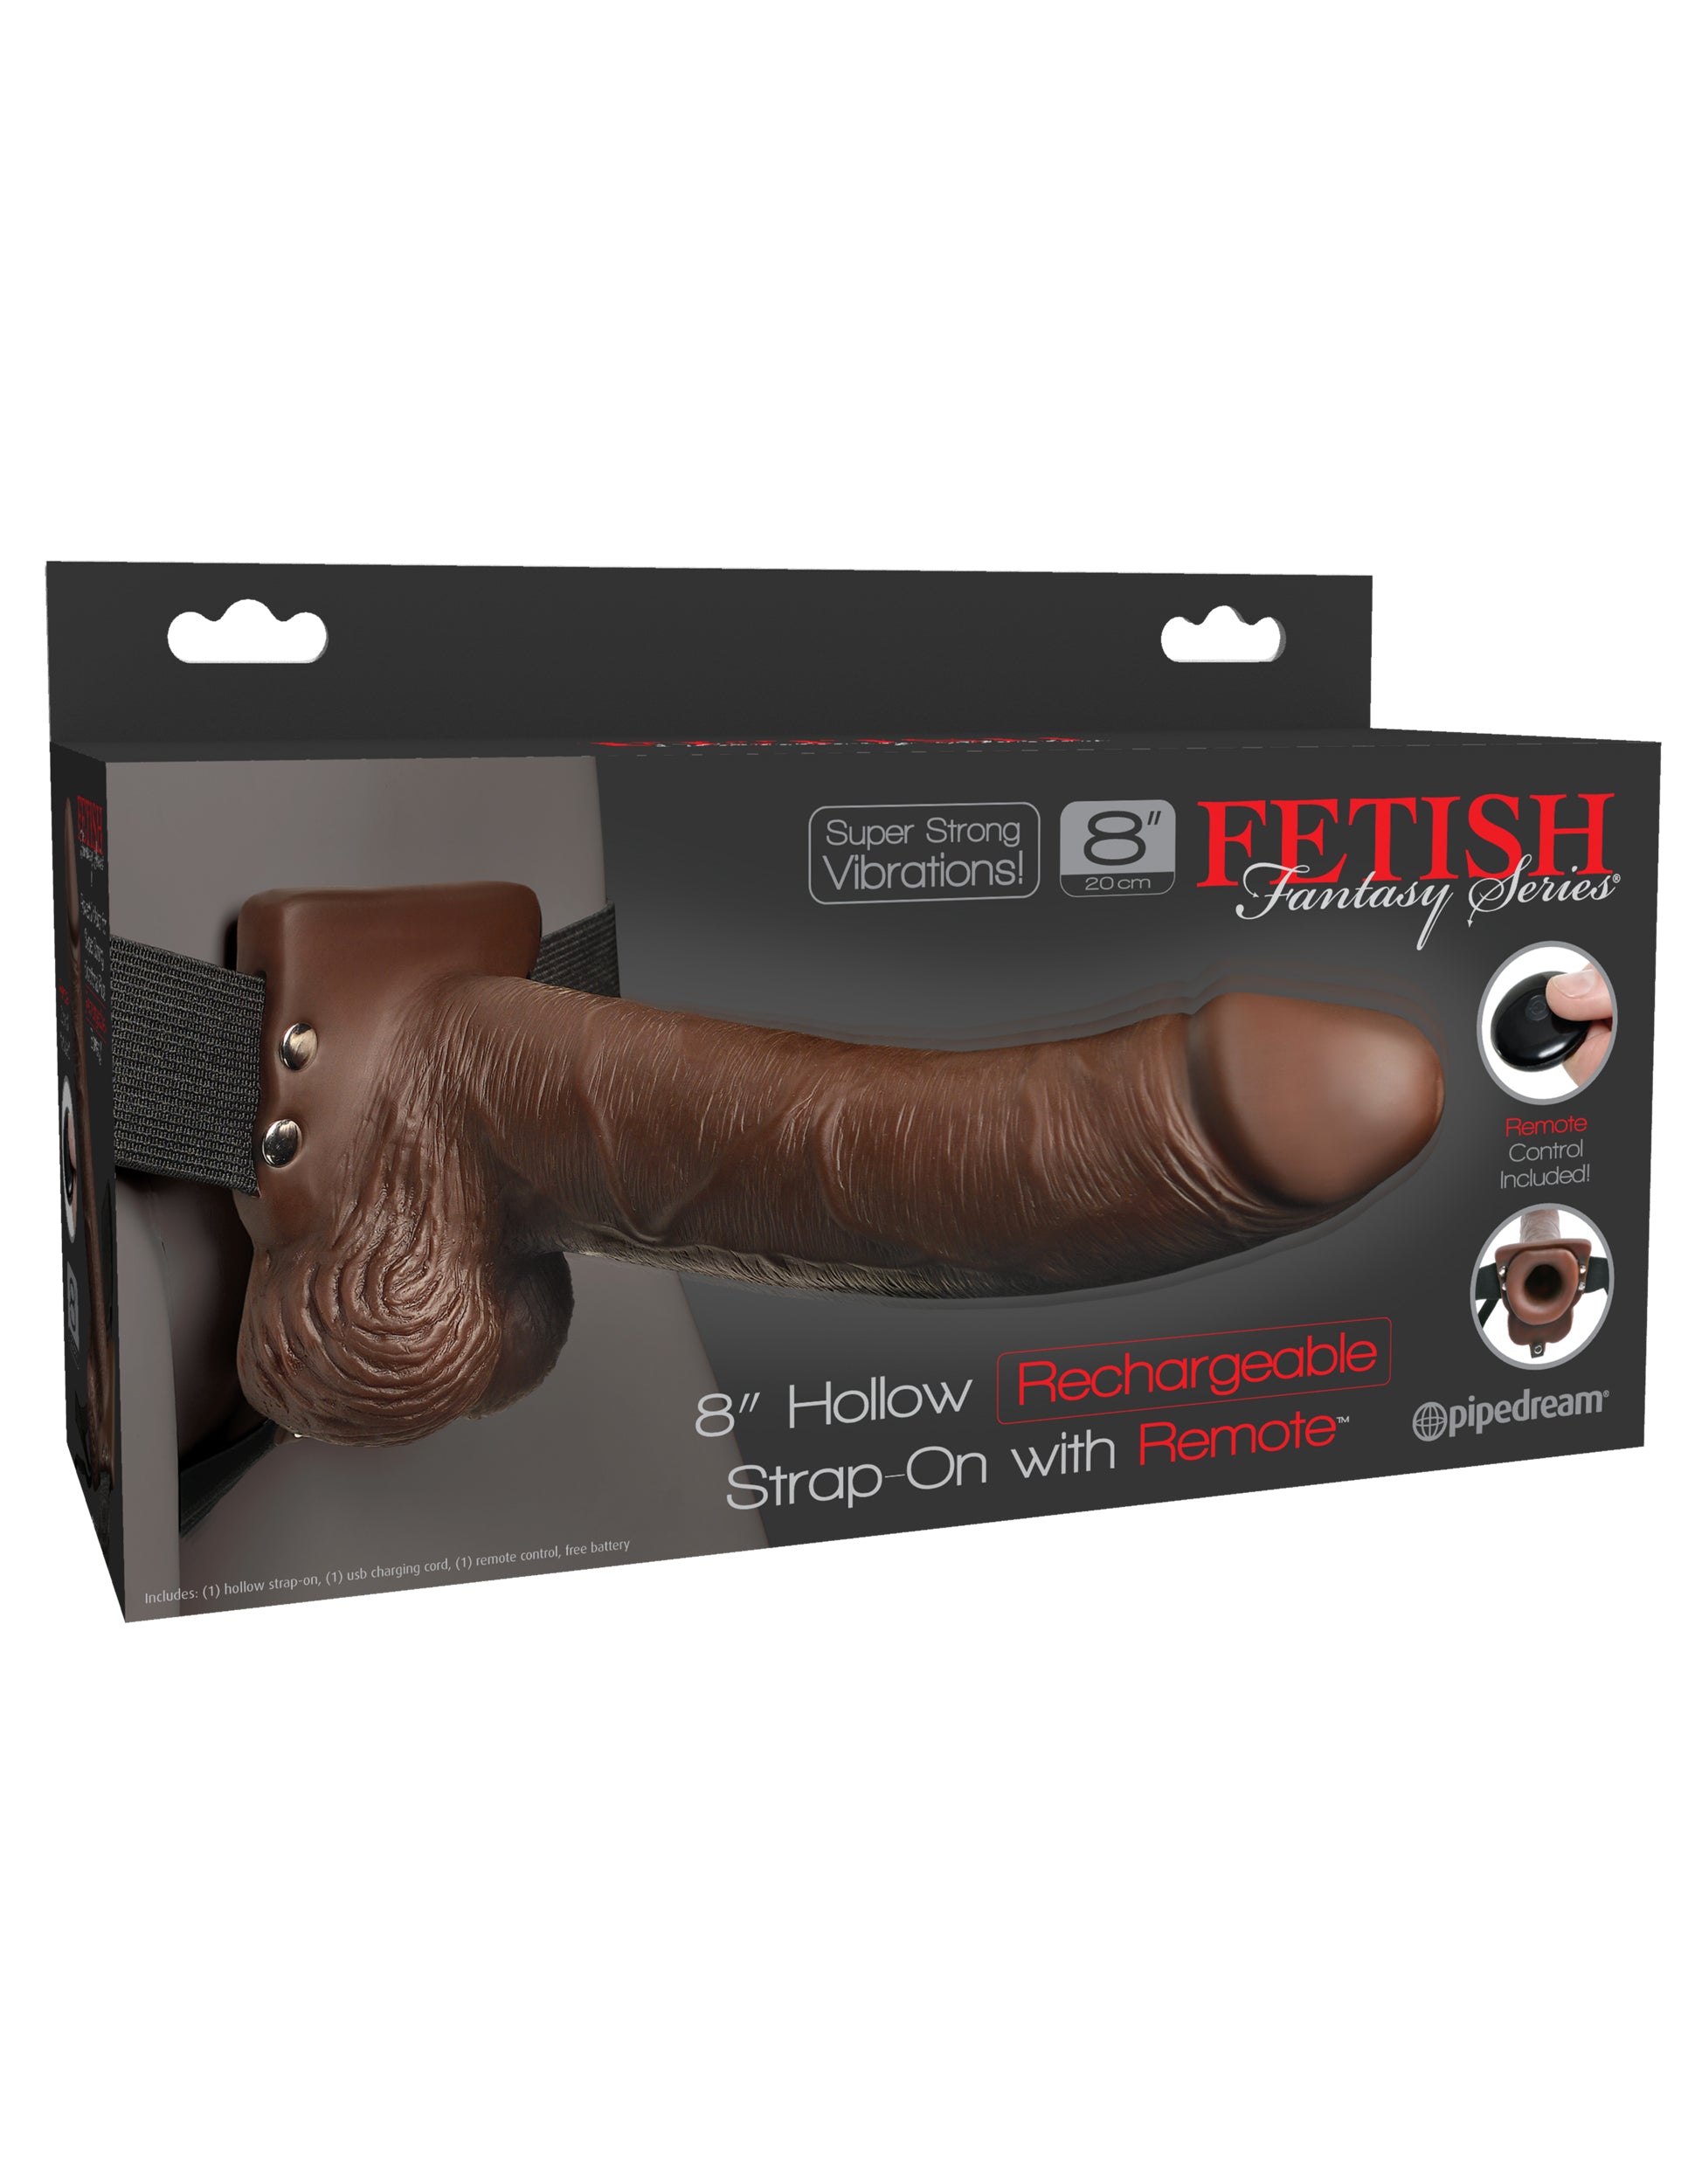 Fetish Fantasy Series 8" Hollow Rechargeable Strap-on With Remote - Brown PD3394-29